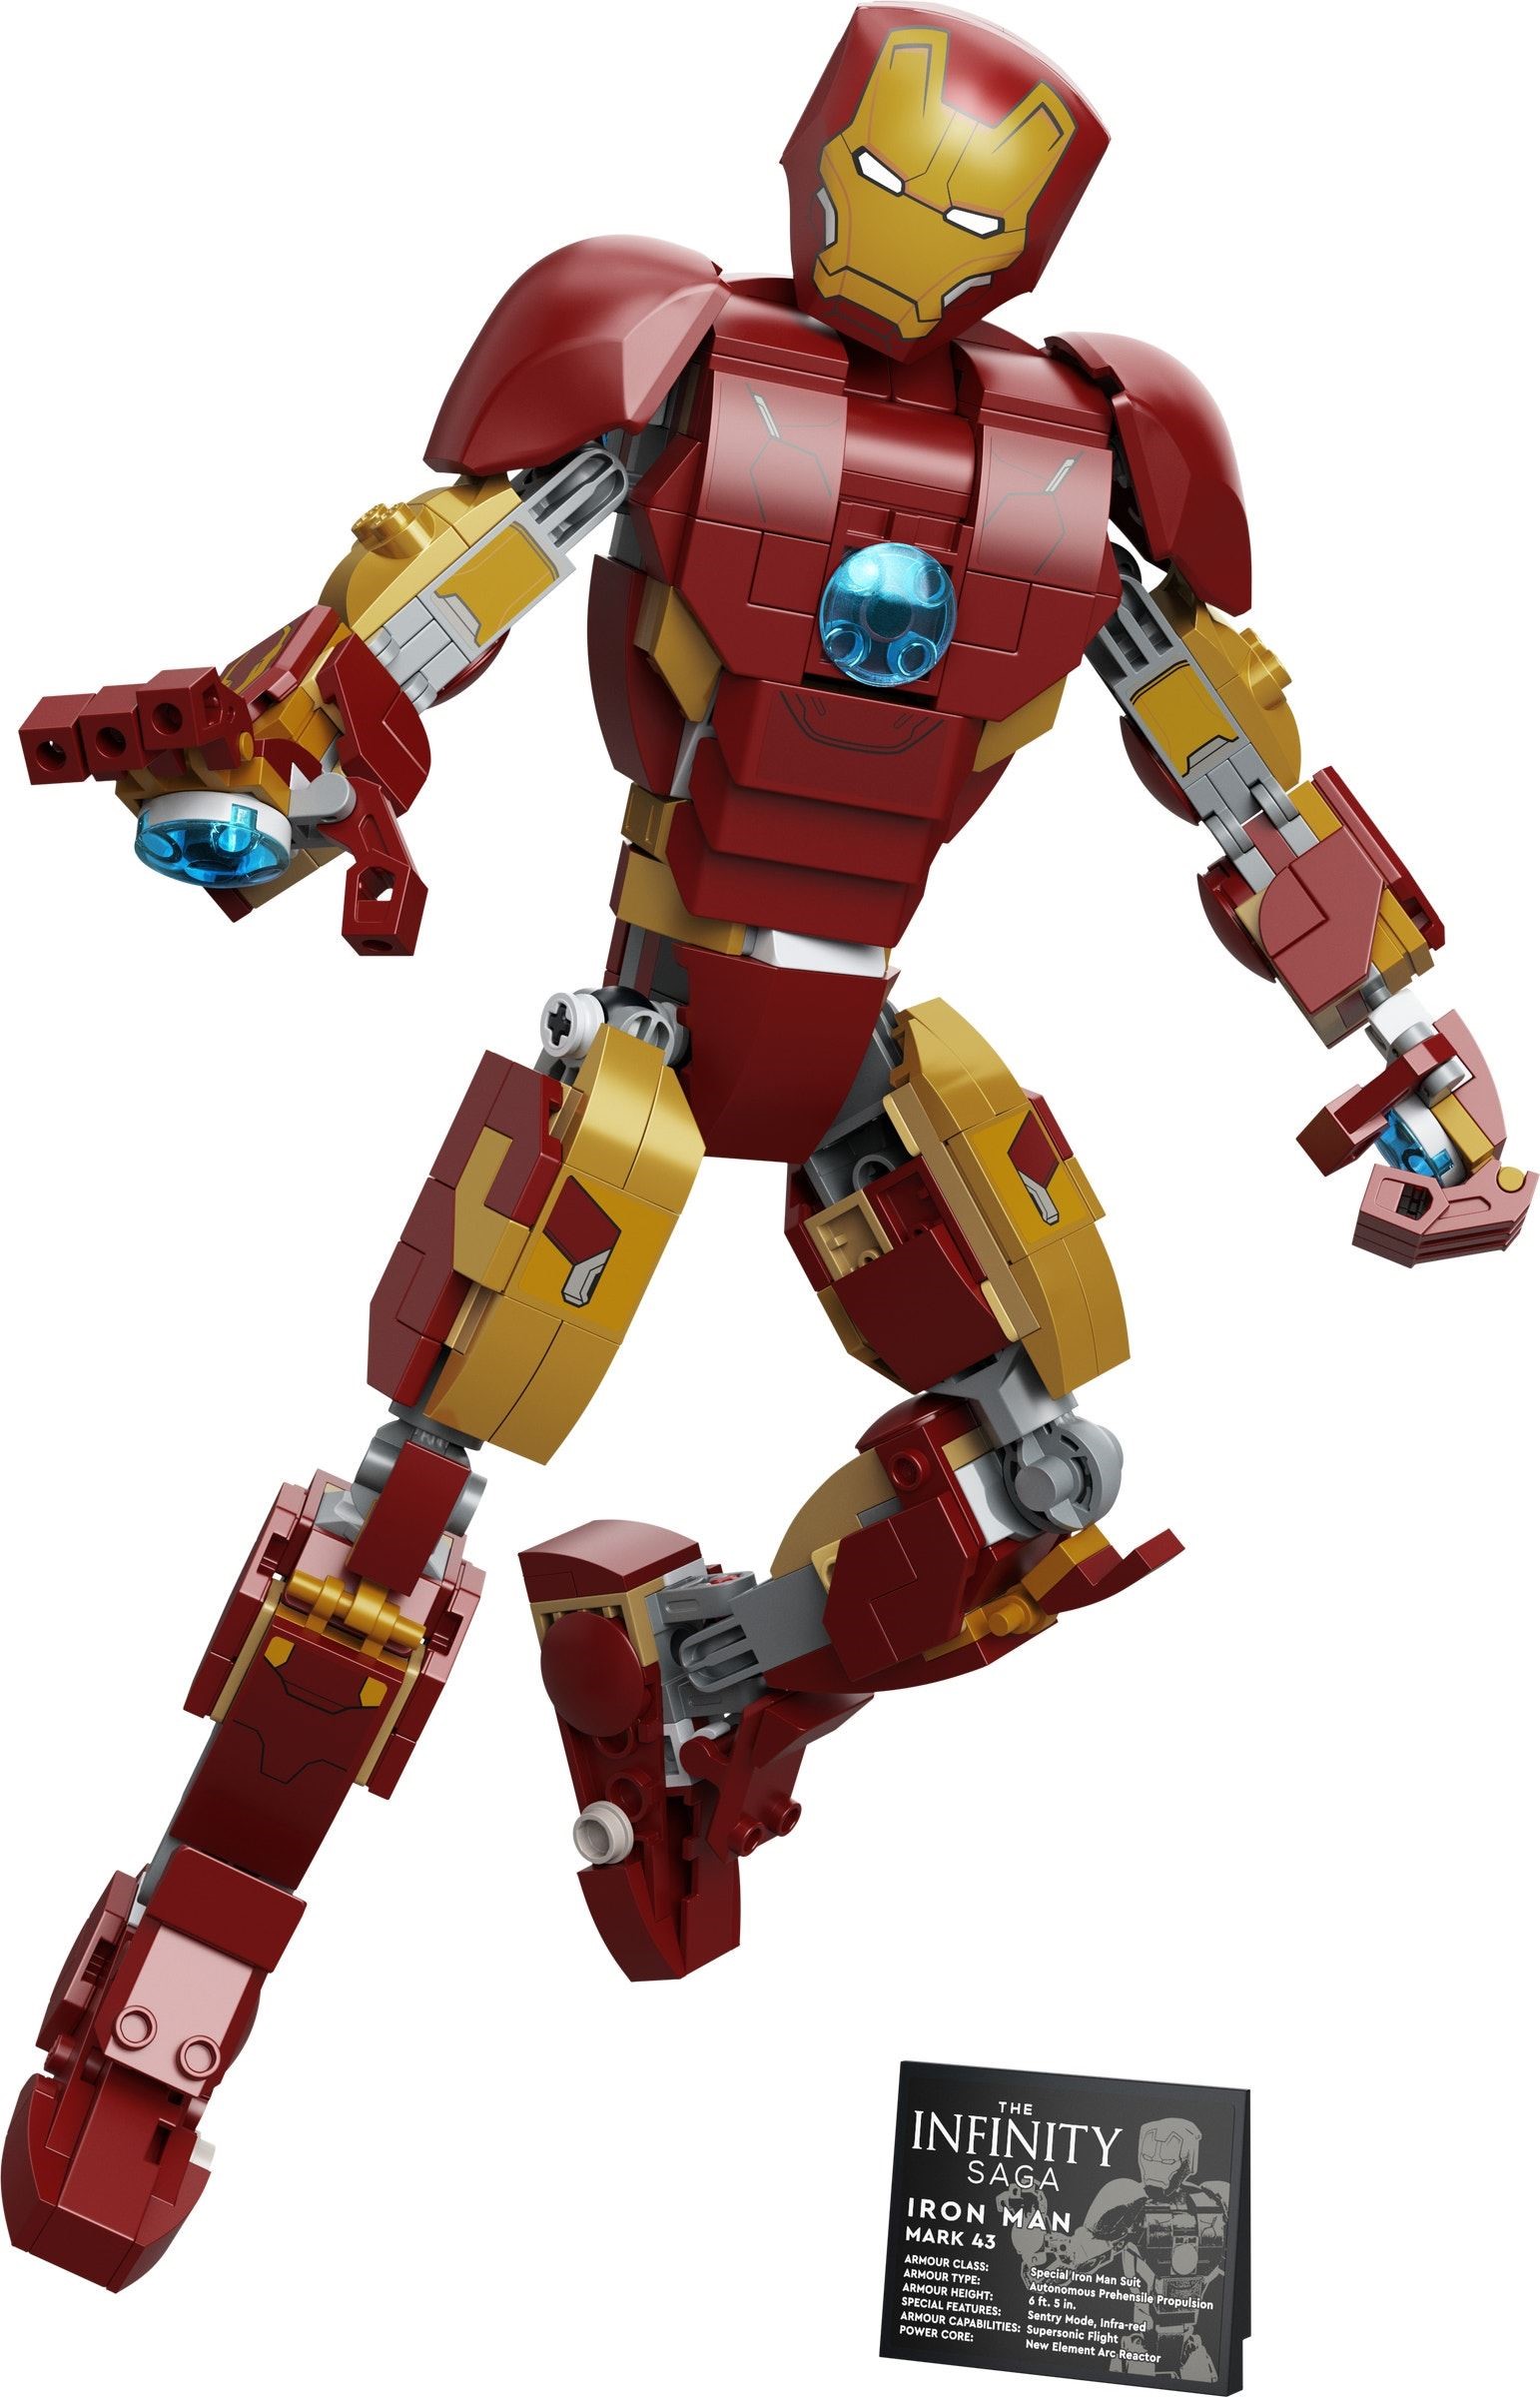 NEW LEGO IRON MAN FROM SET 76105 AVENGERS AGE OF ULTRON sh498 